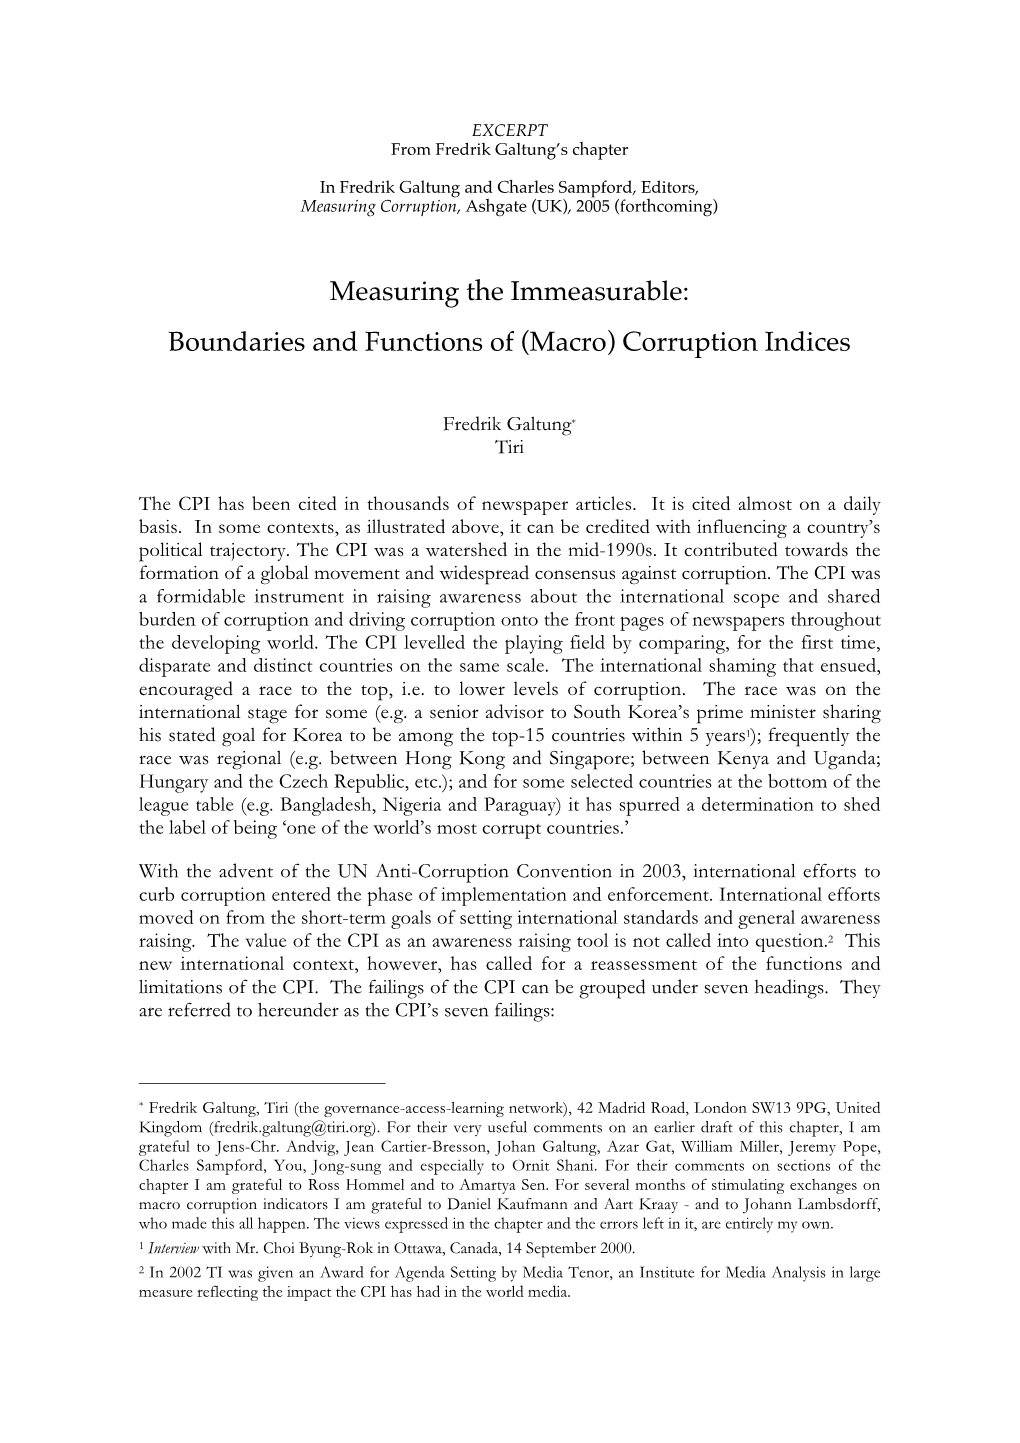 Measuring the Immeasurable: Boundaries and Functions of (Macro) Corruption Indices